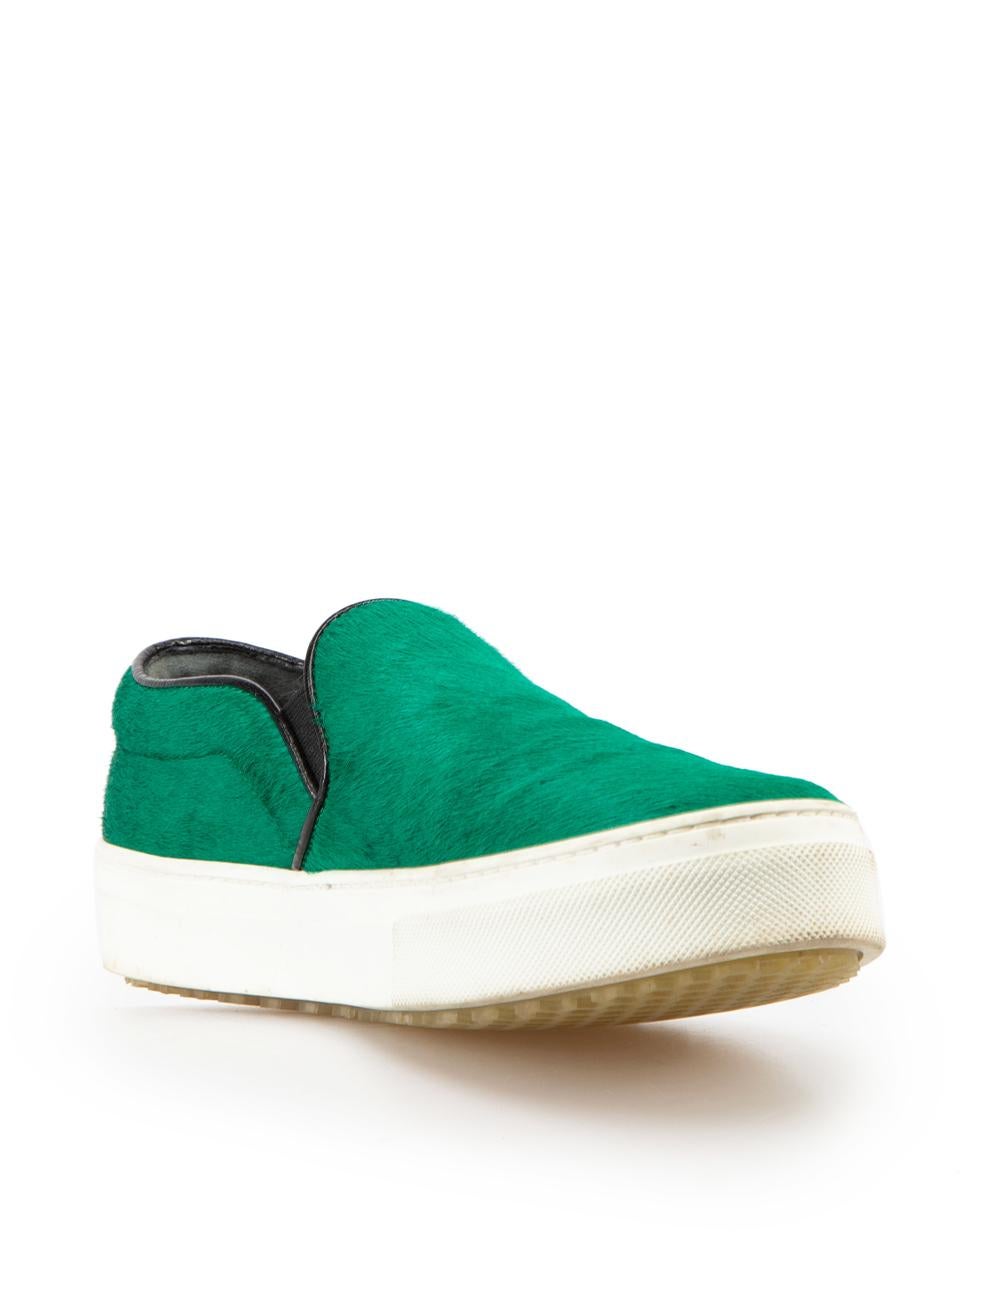 Celine Green Pony Hair Slip On Trainers Size IT 37.5 In Excellent Condition For Sale In London, GB